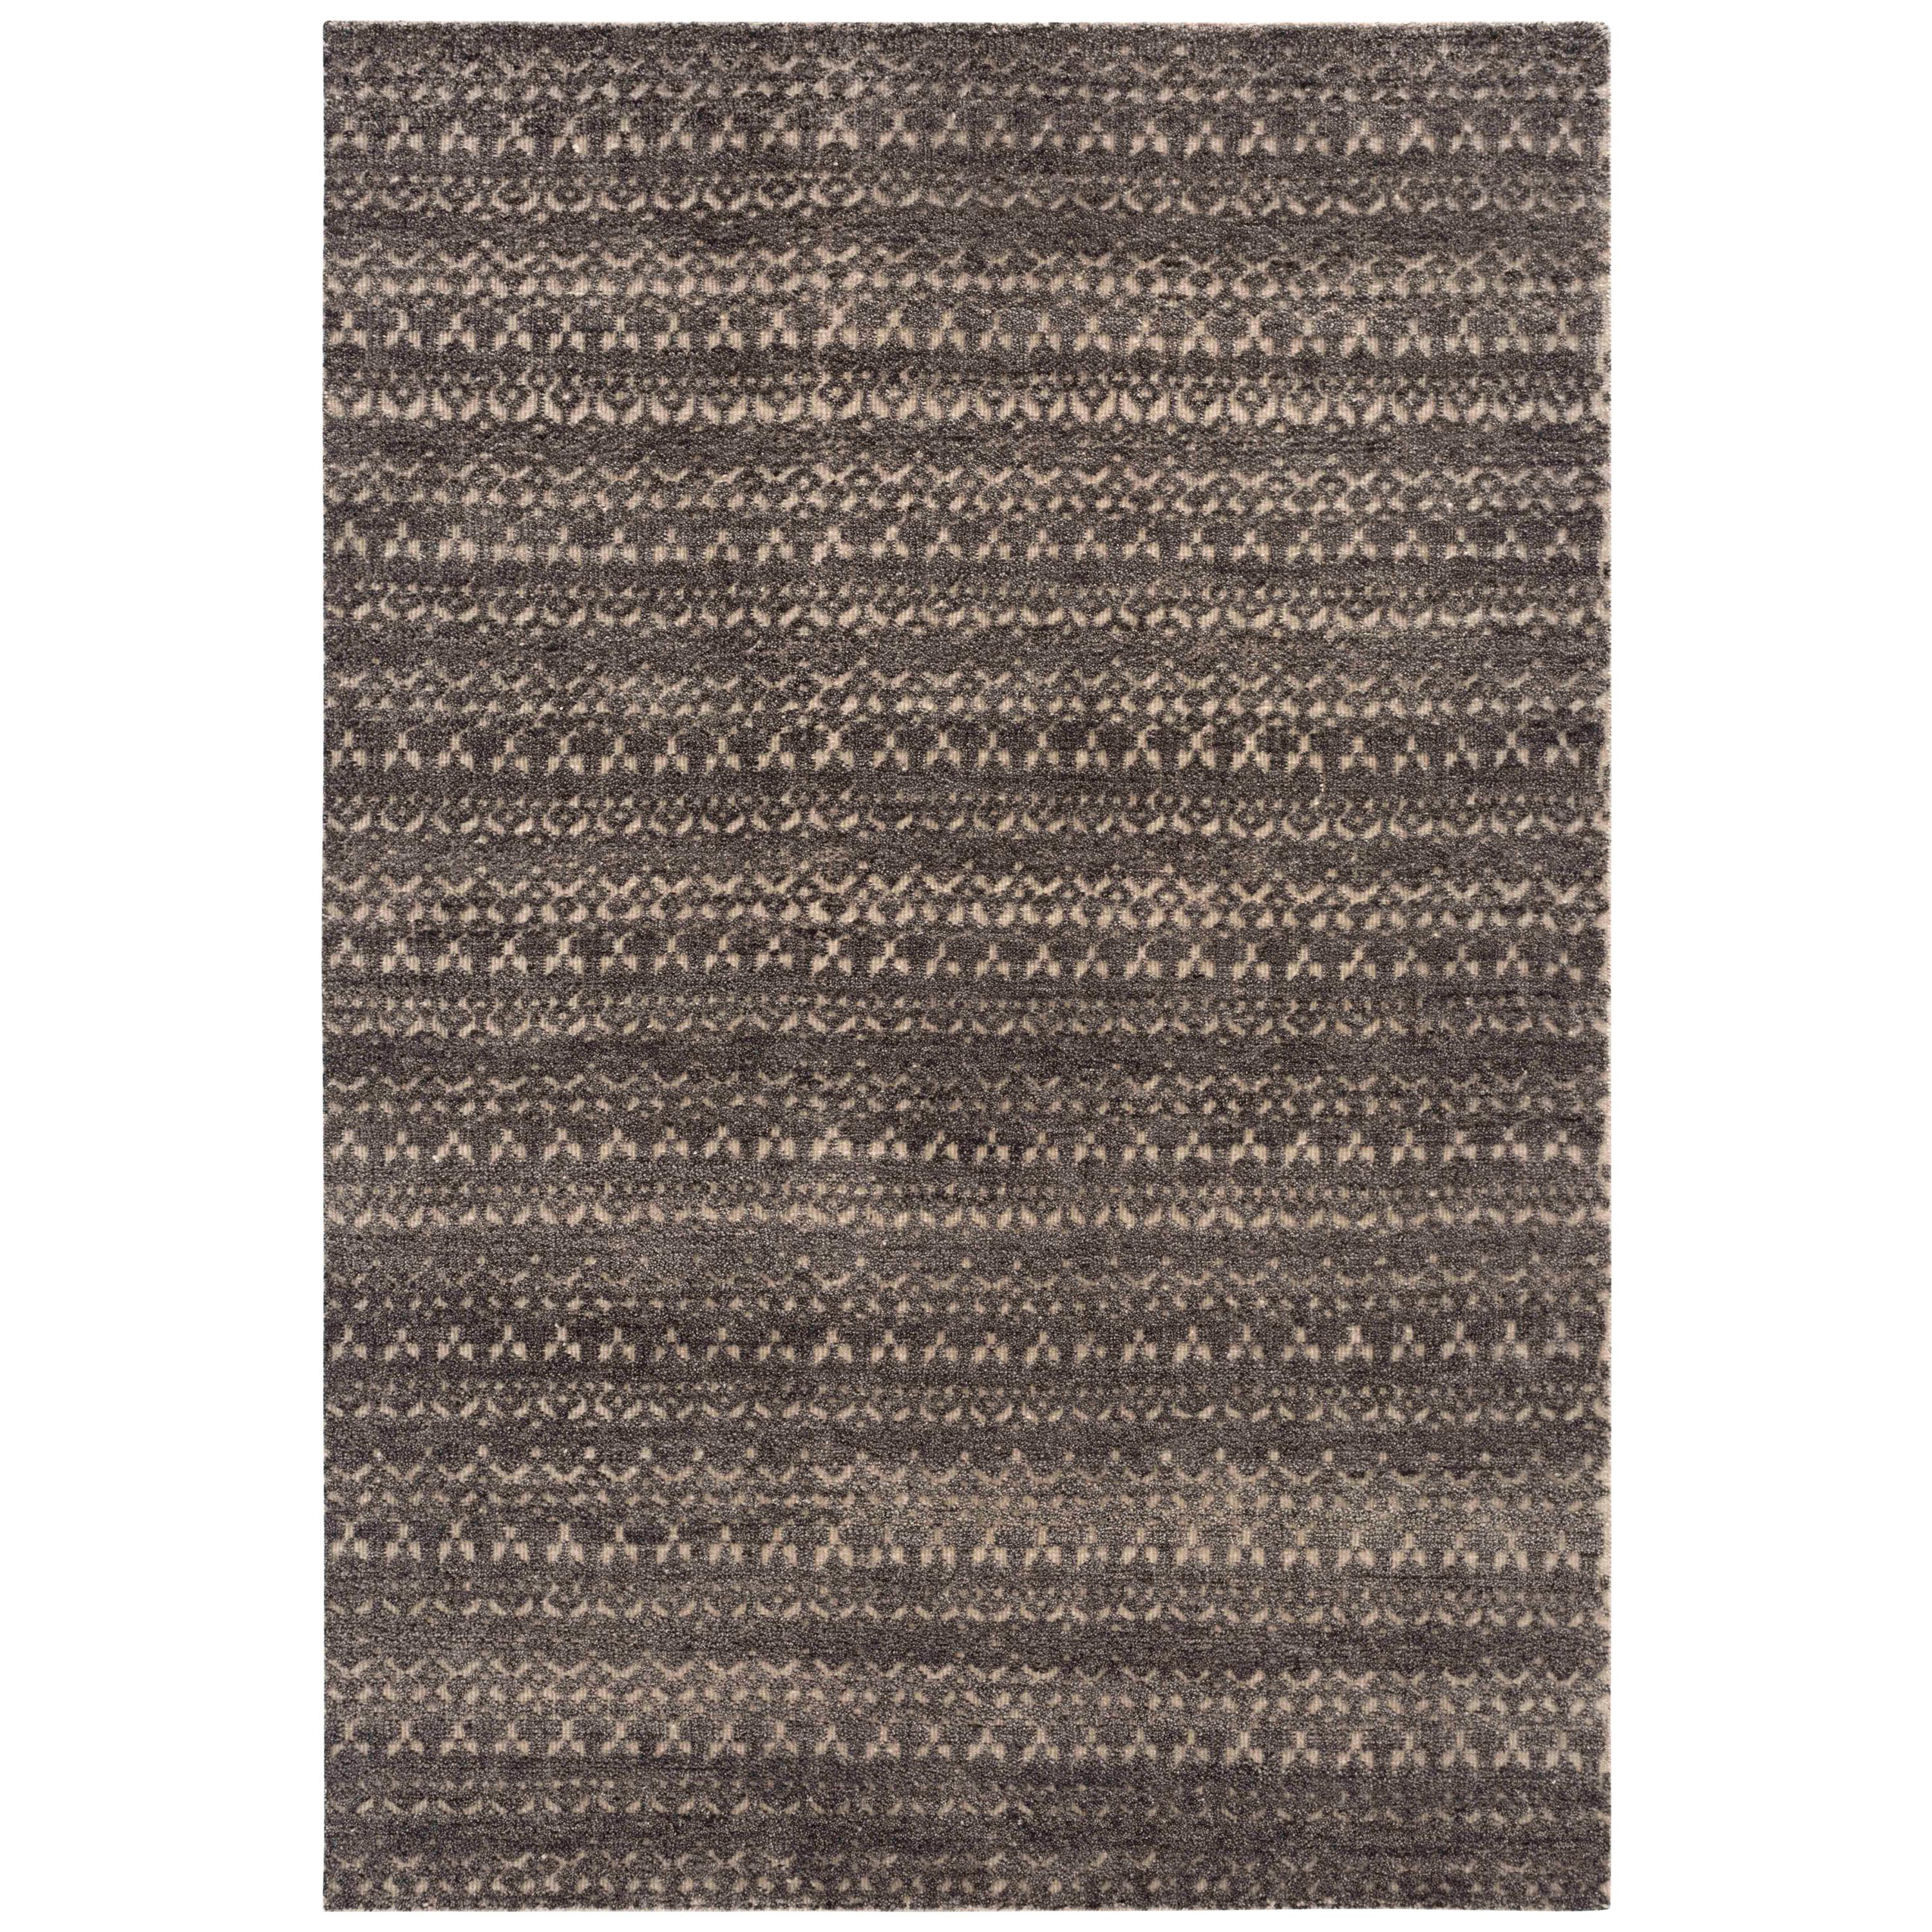 GAN Cirus Rug in Hand Knotted Gray and Brown Wool